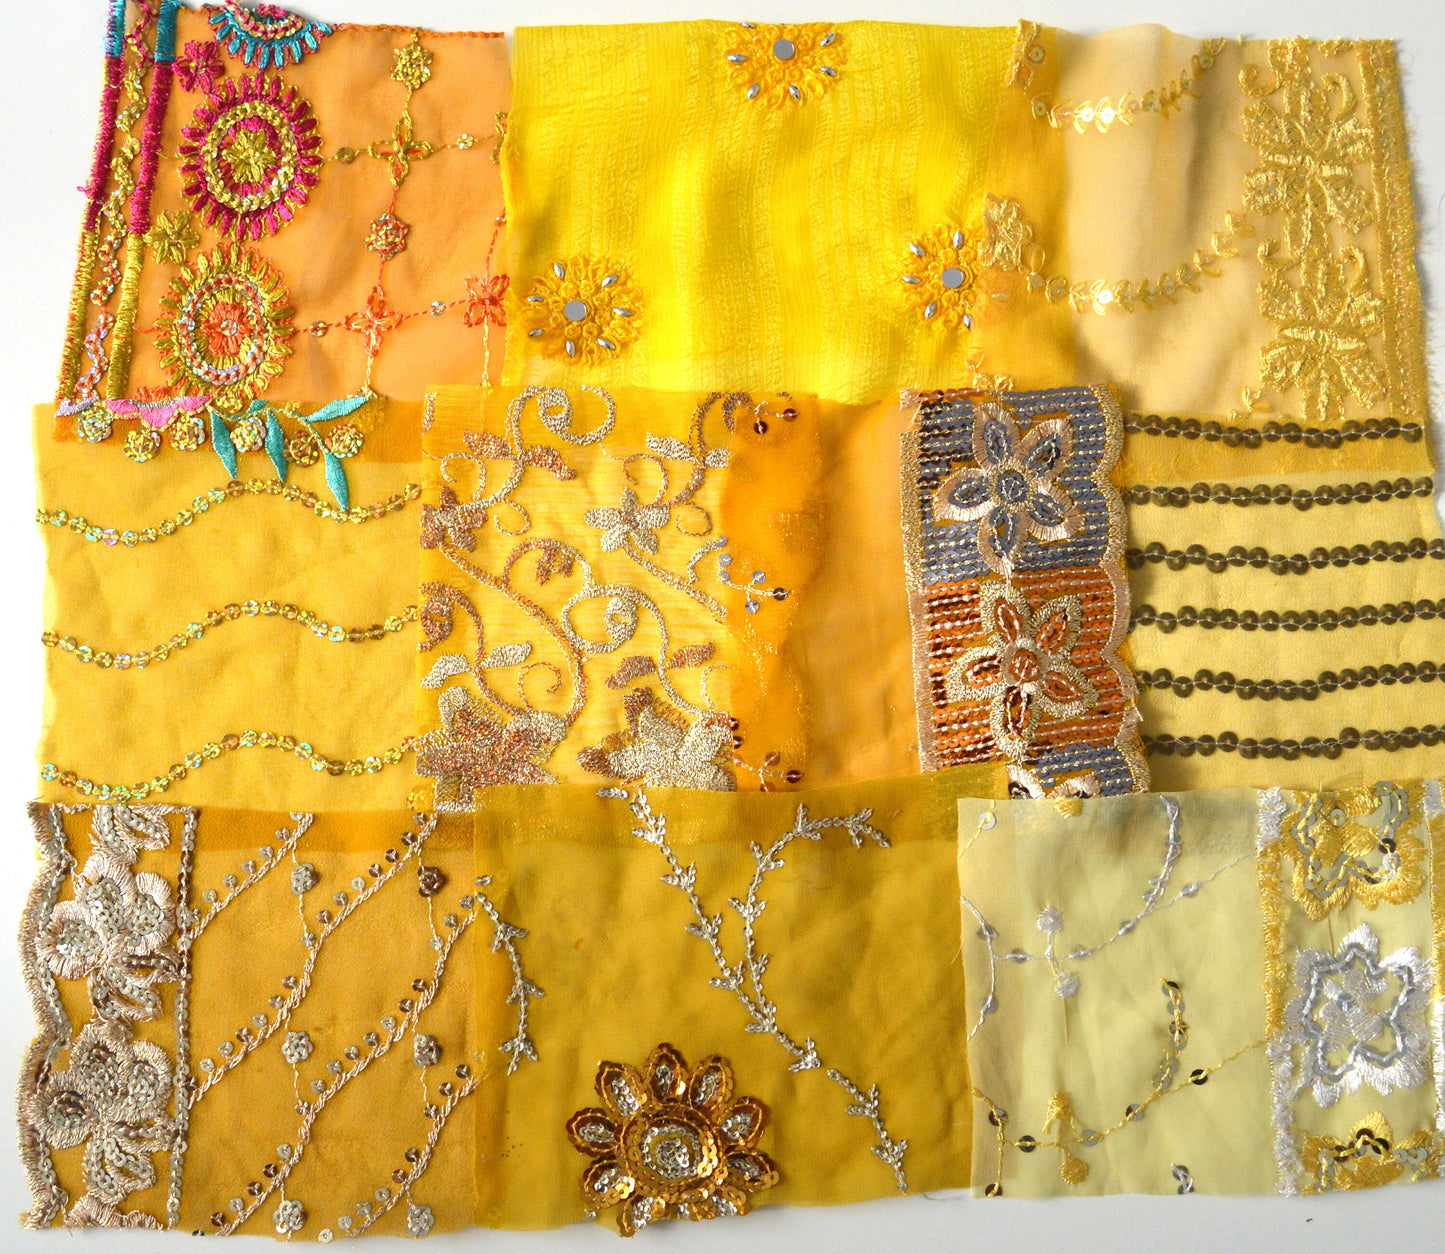 Yellow Assorted Embellished Sari Fabric Remnants Scraps - 10 Pieces